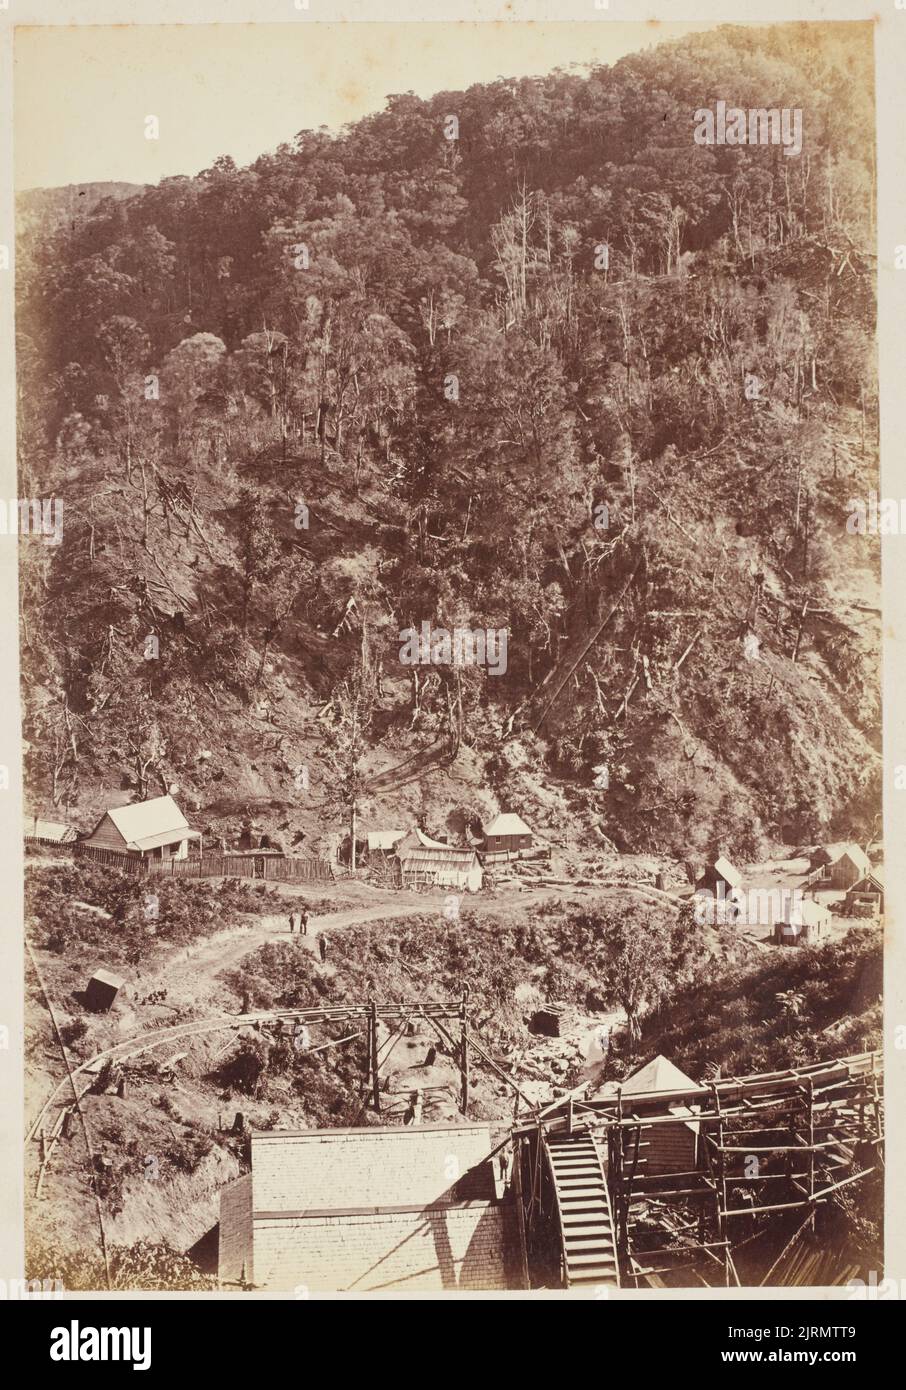 Russell's Gold Battery. From the album: Scenes of New Zealand, circa 1880, Tararua Range, by Messrs. F. Bradley & Co. Stock Photo